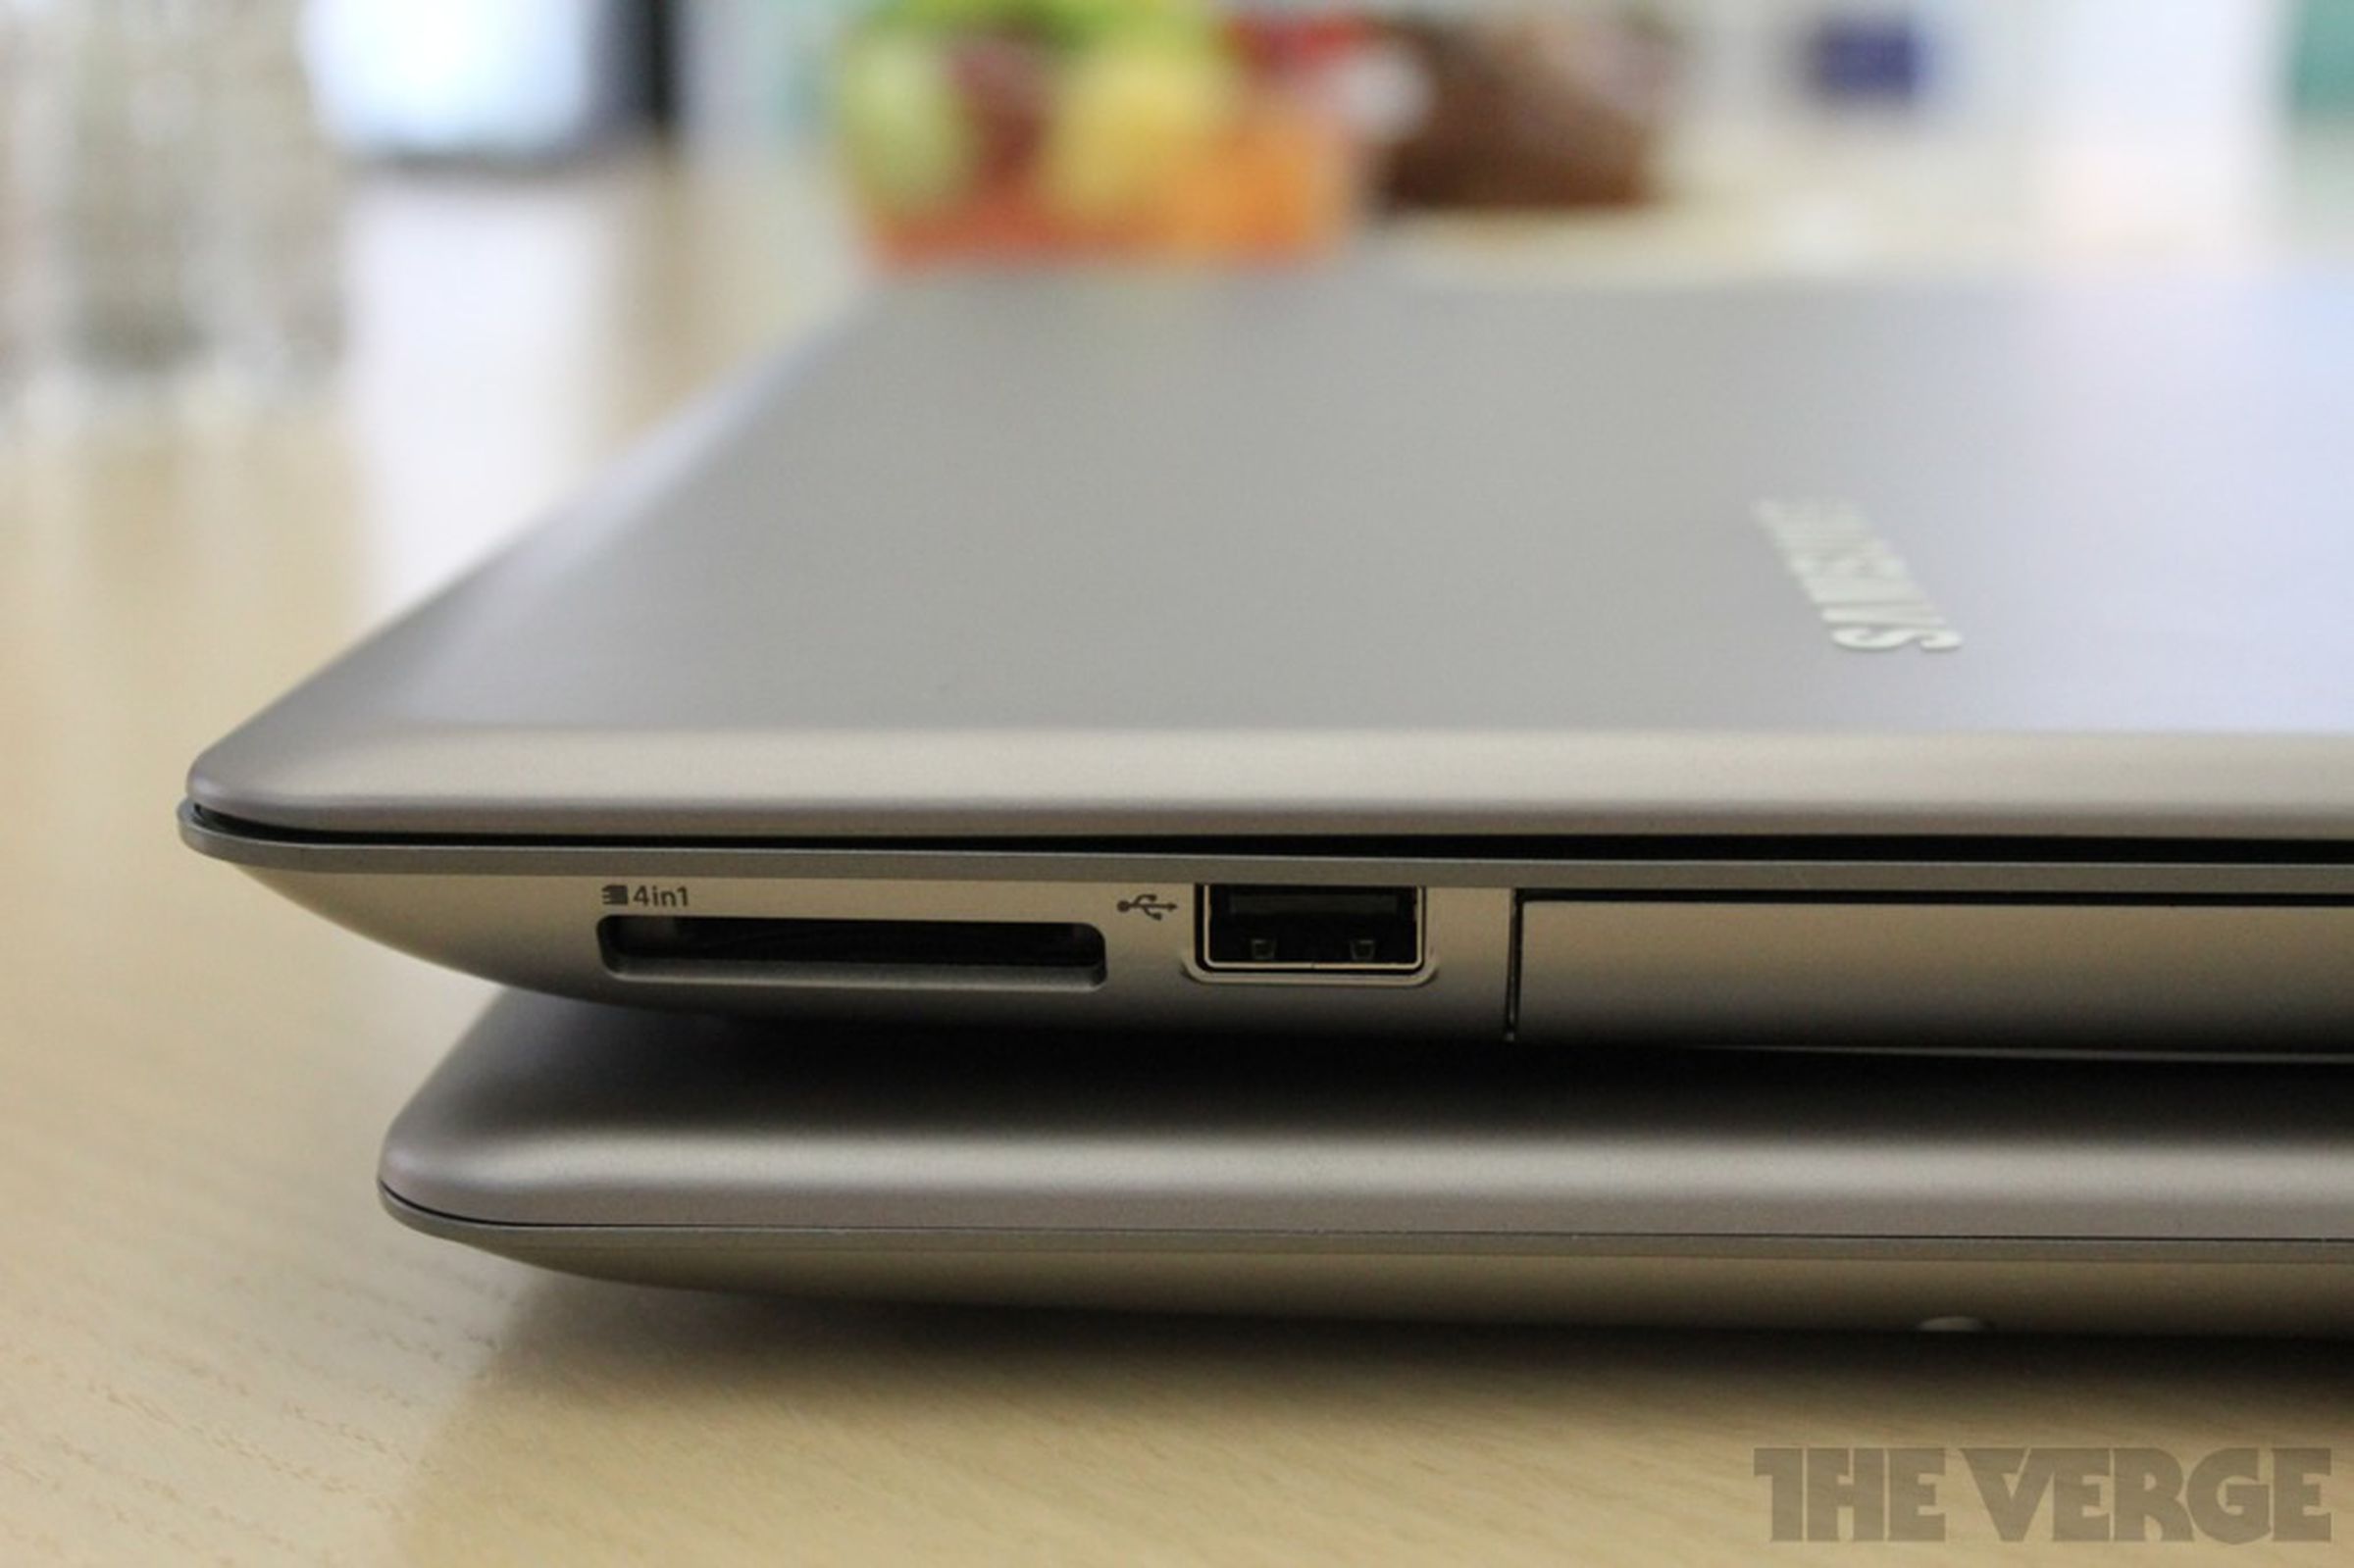 Samsung Series 5 Ultra hands-on pictures